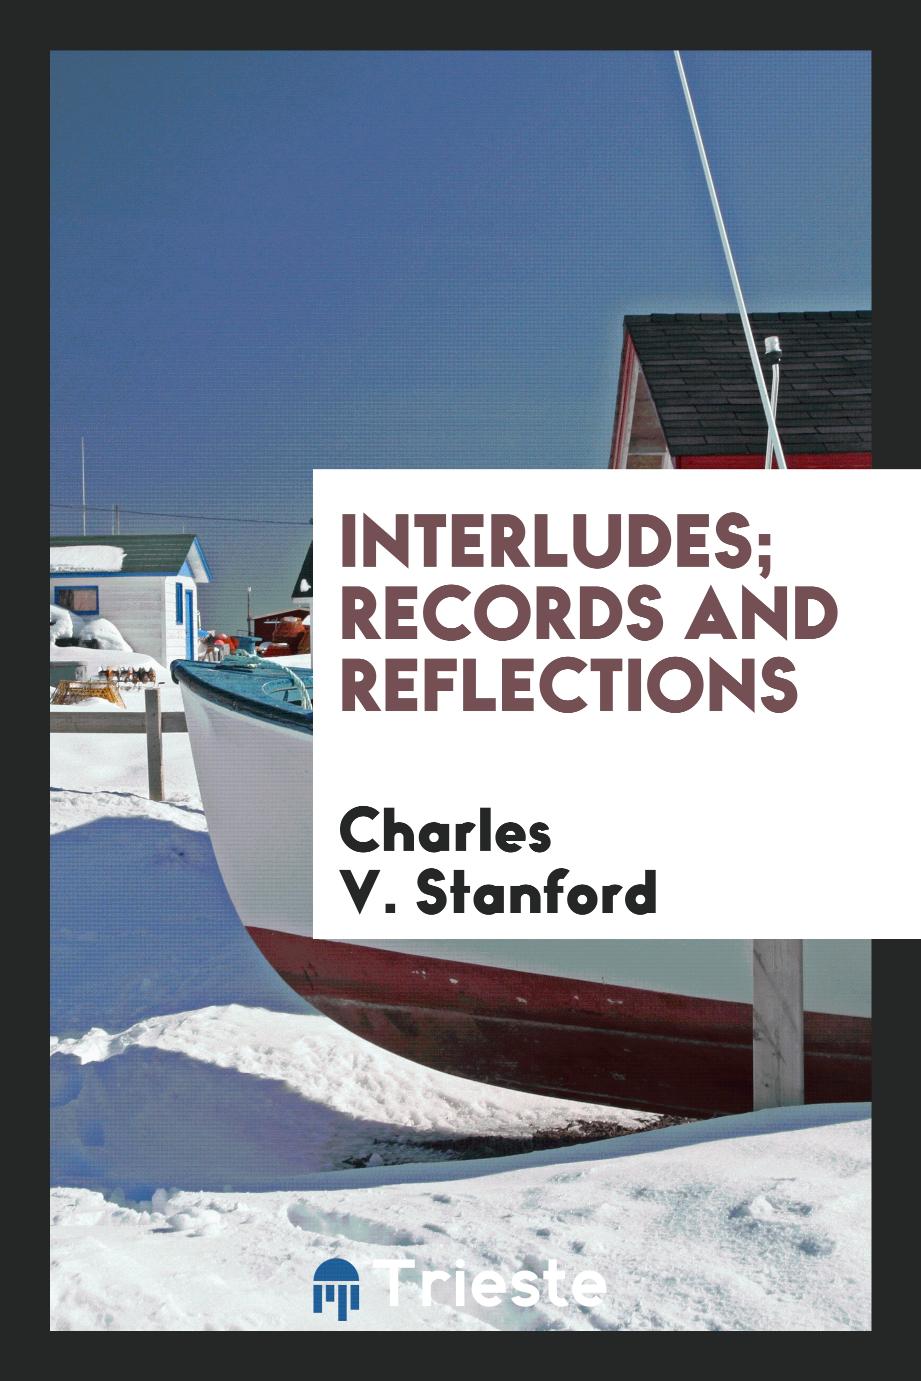 Interludes; records and reflections